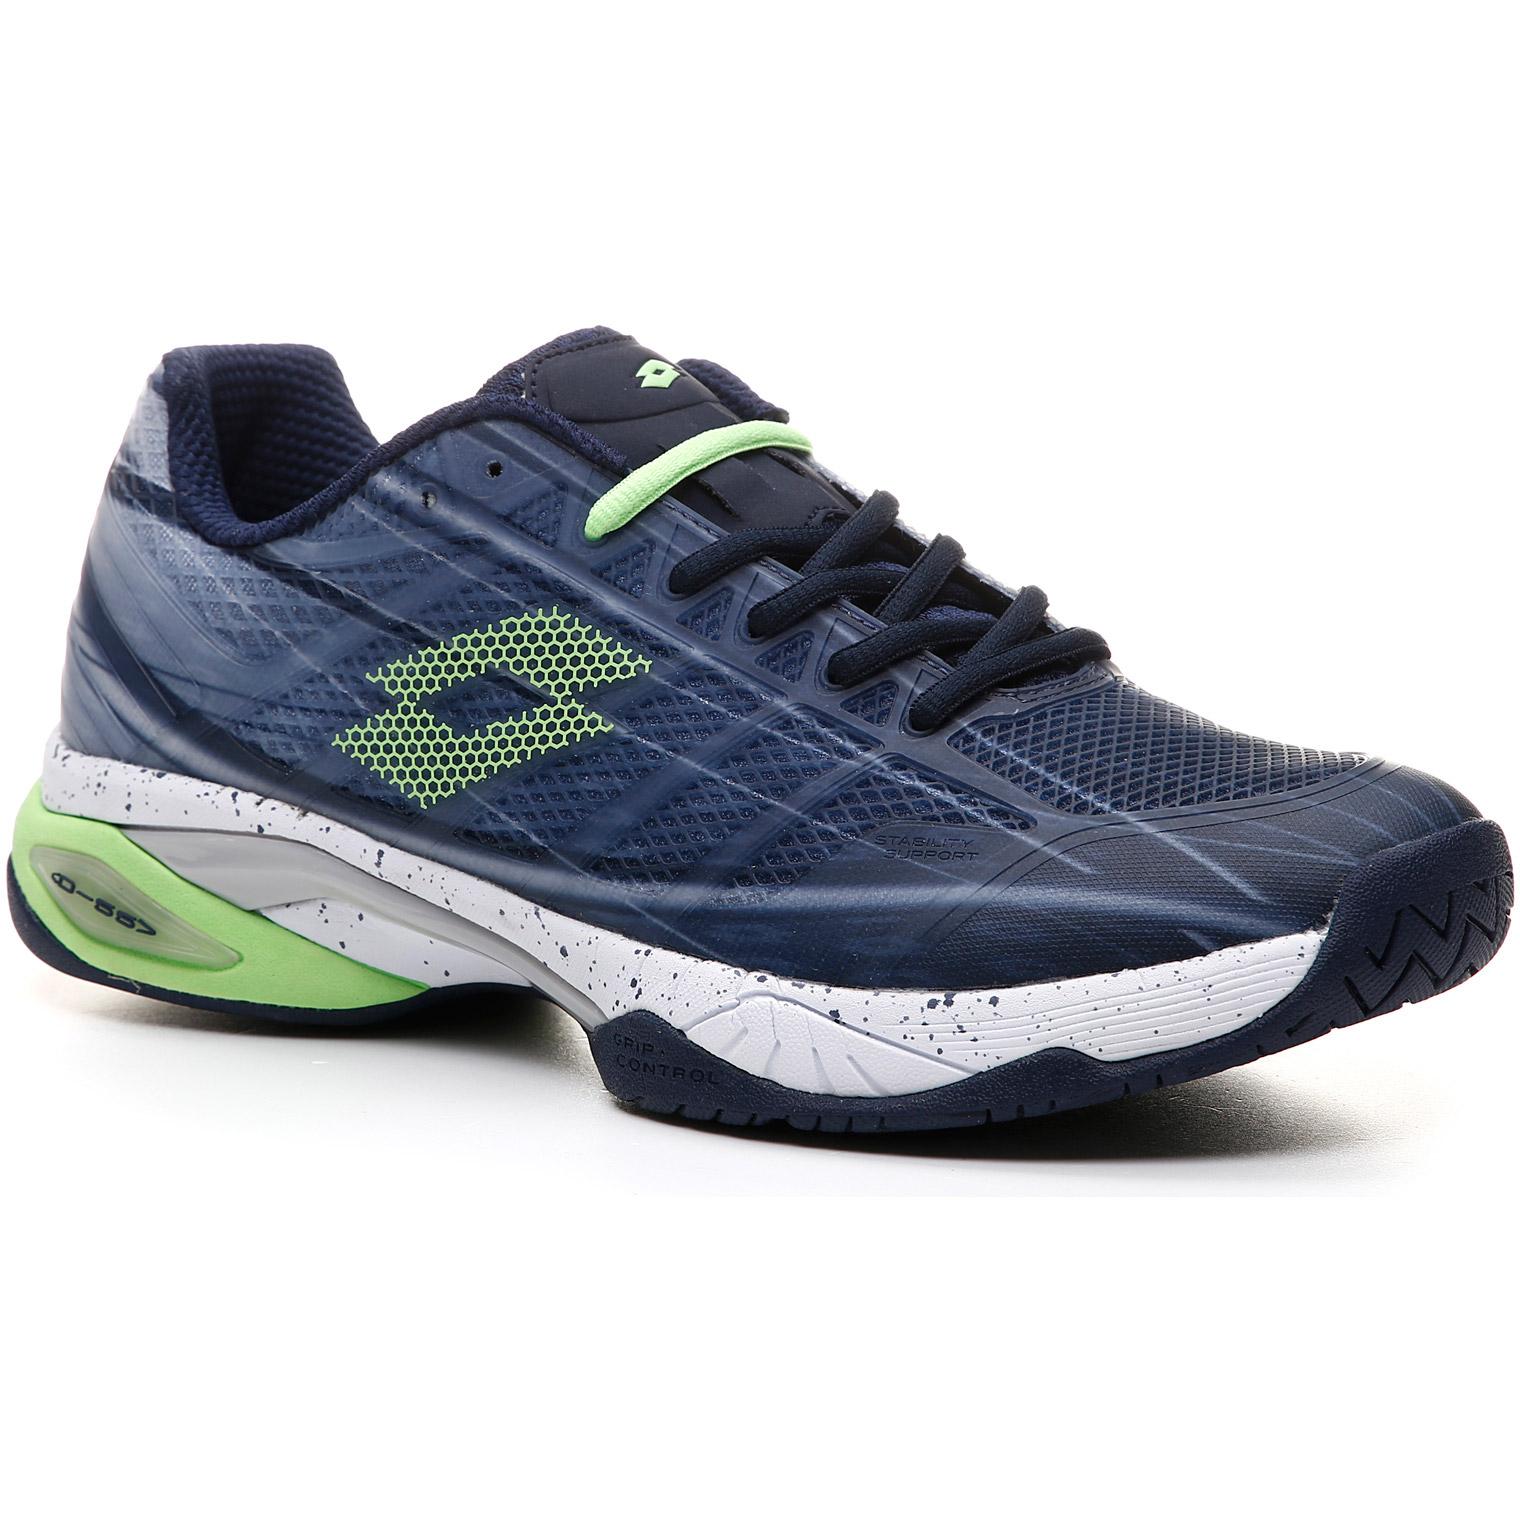 Lotto Mens Mirage 300 Tennis Shoes Navy Blue/Green Apple